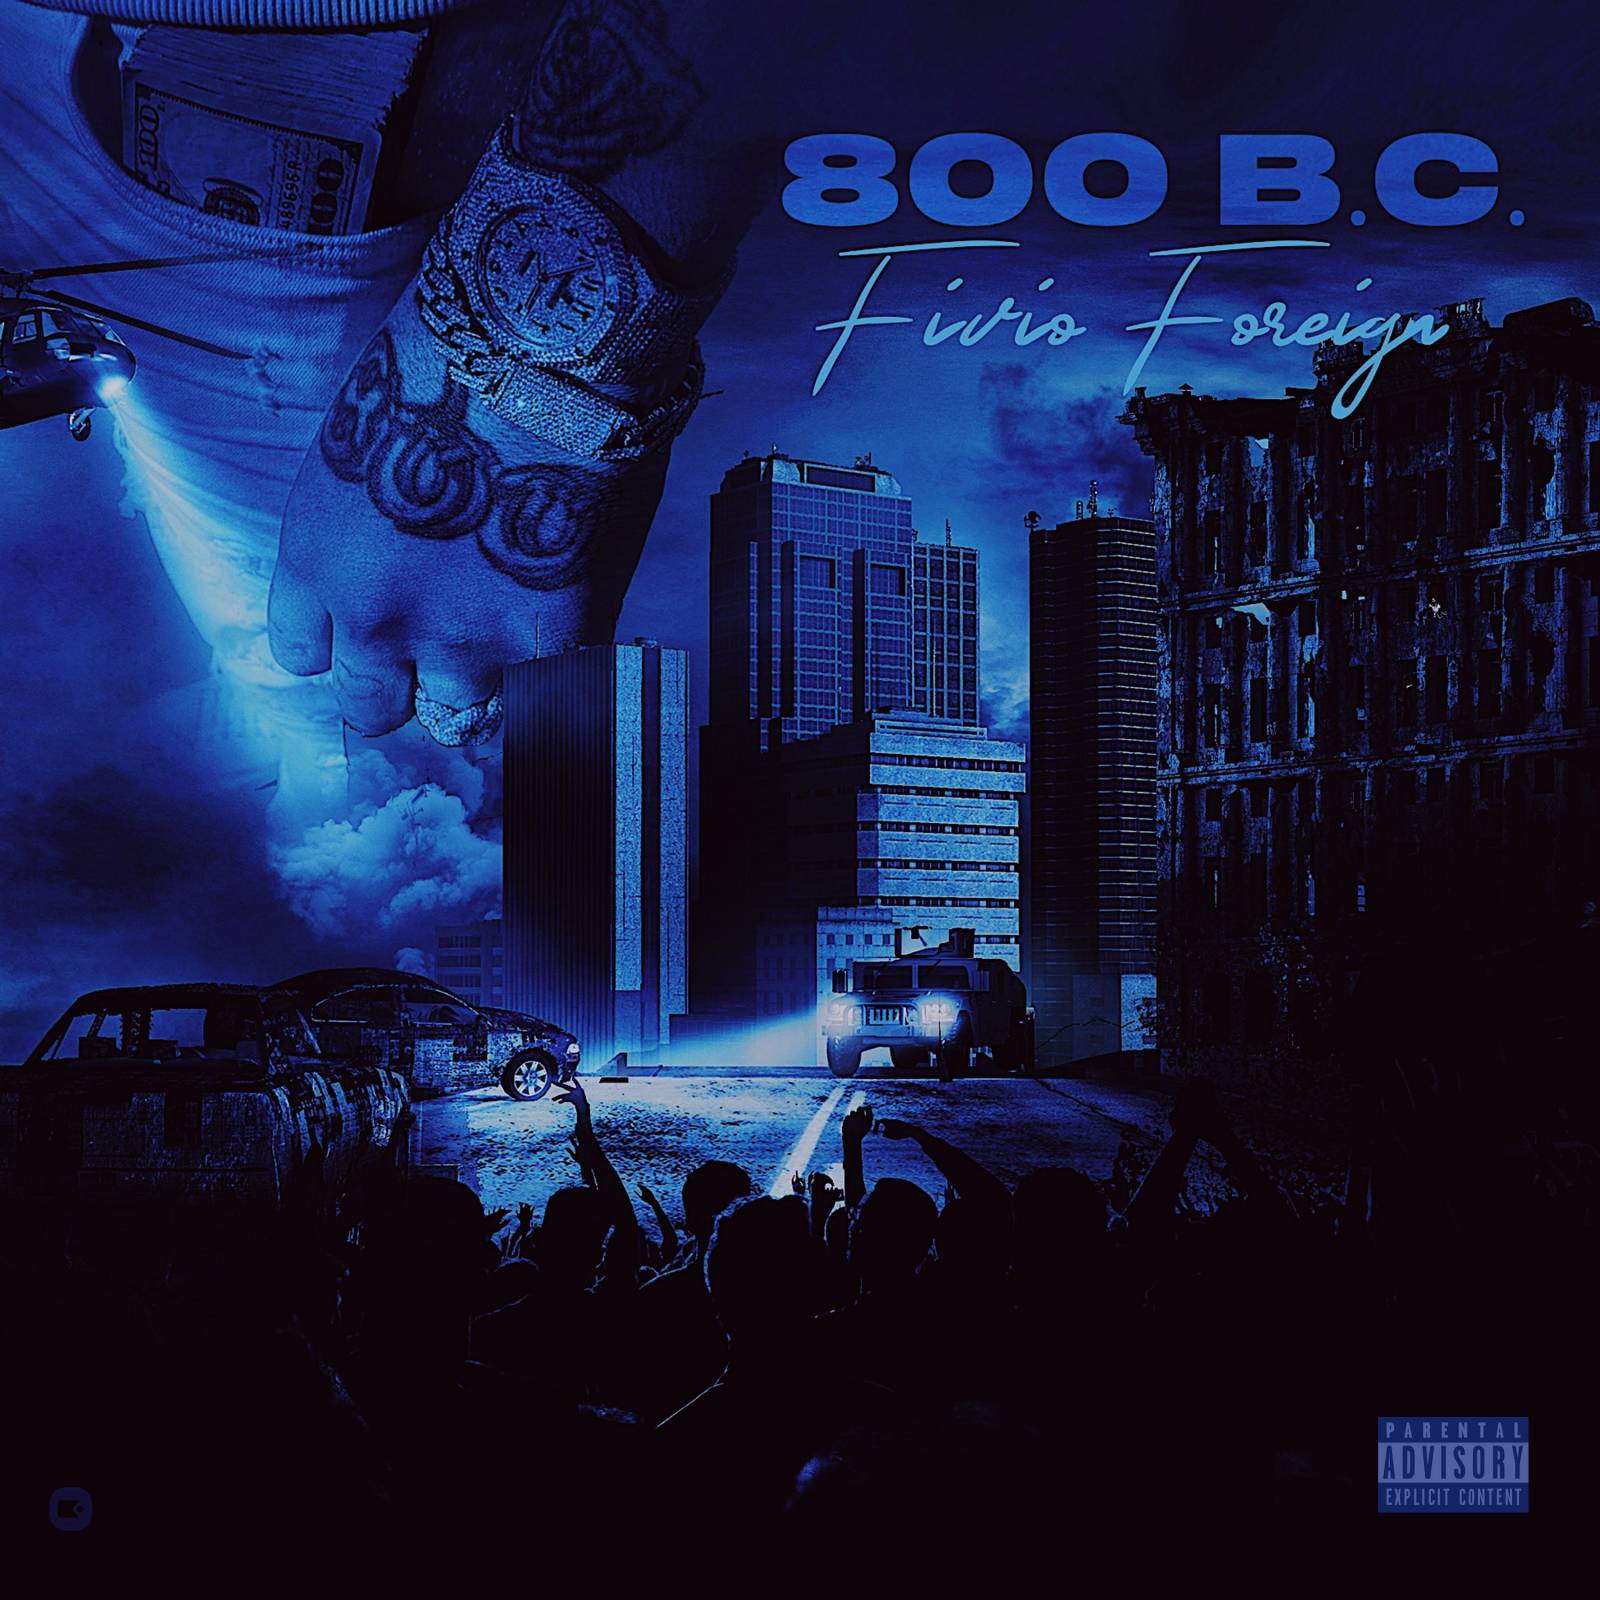 Fivio Foreign Drops '800 B.C.' Project